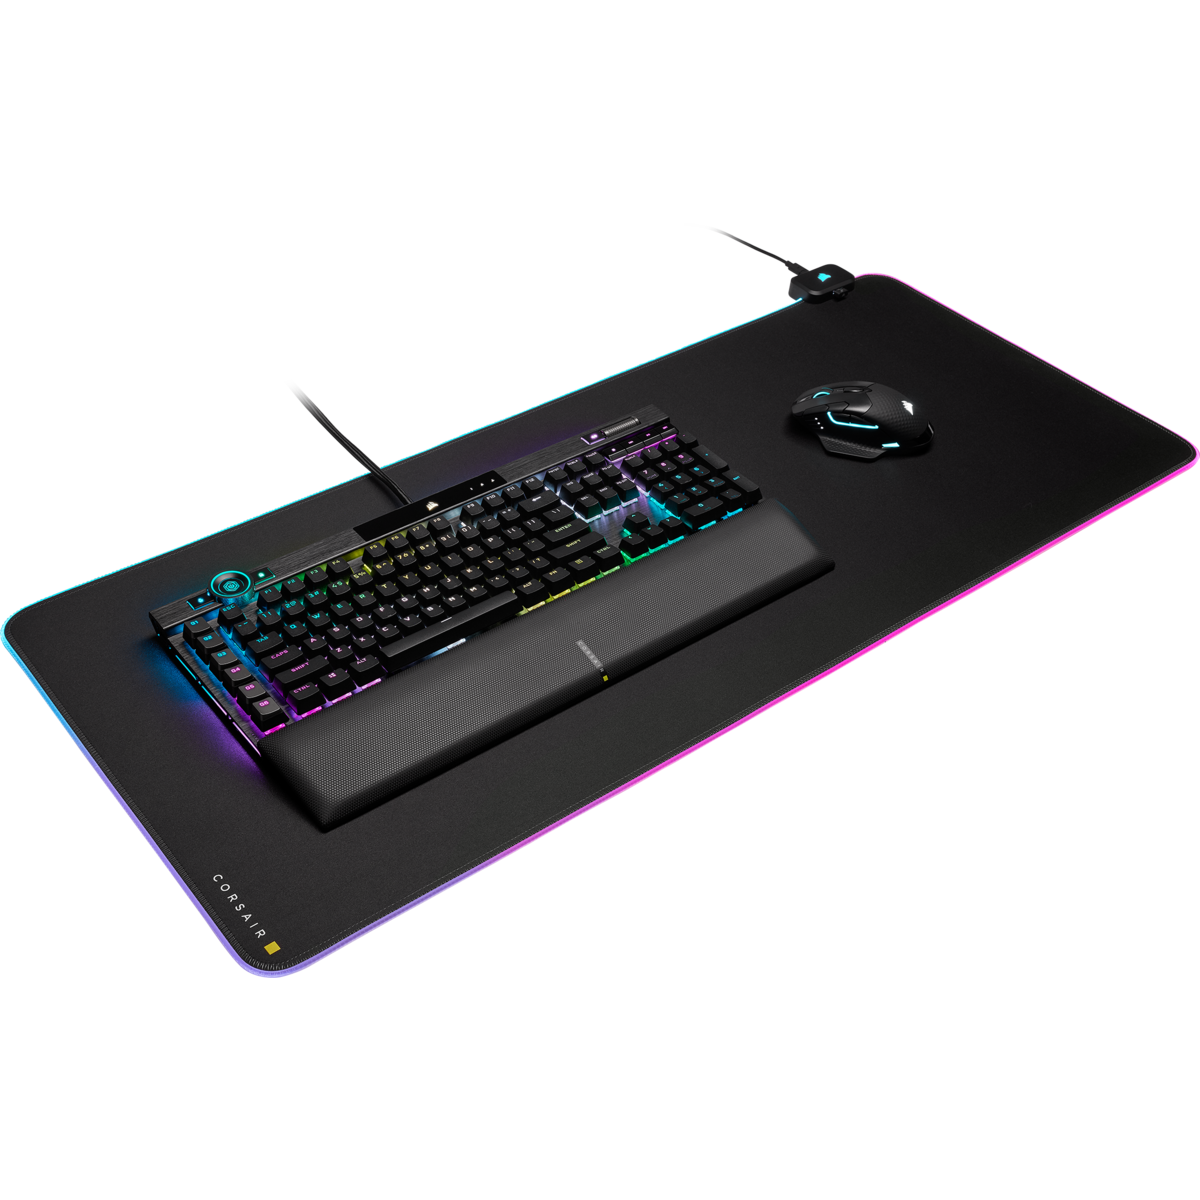  Mouse mat: CORSAIR MM700 RGB Extended Cloth Gaming Mouse Pad, 930 x 400mm, 3-zone dynamic RGB lightning  